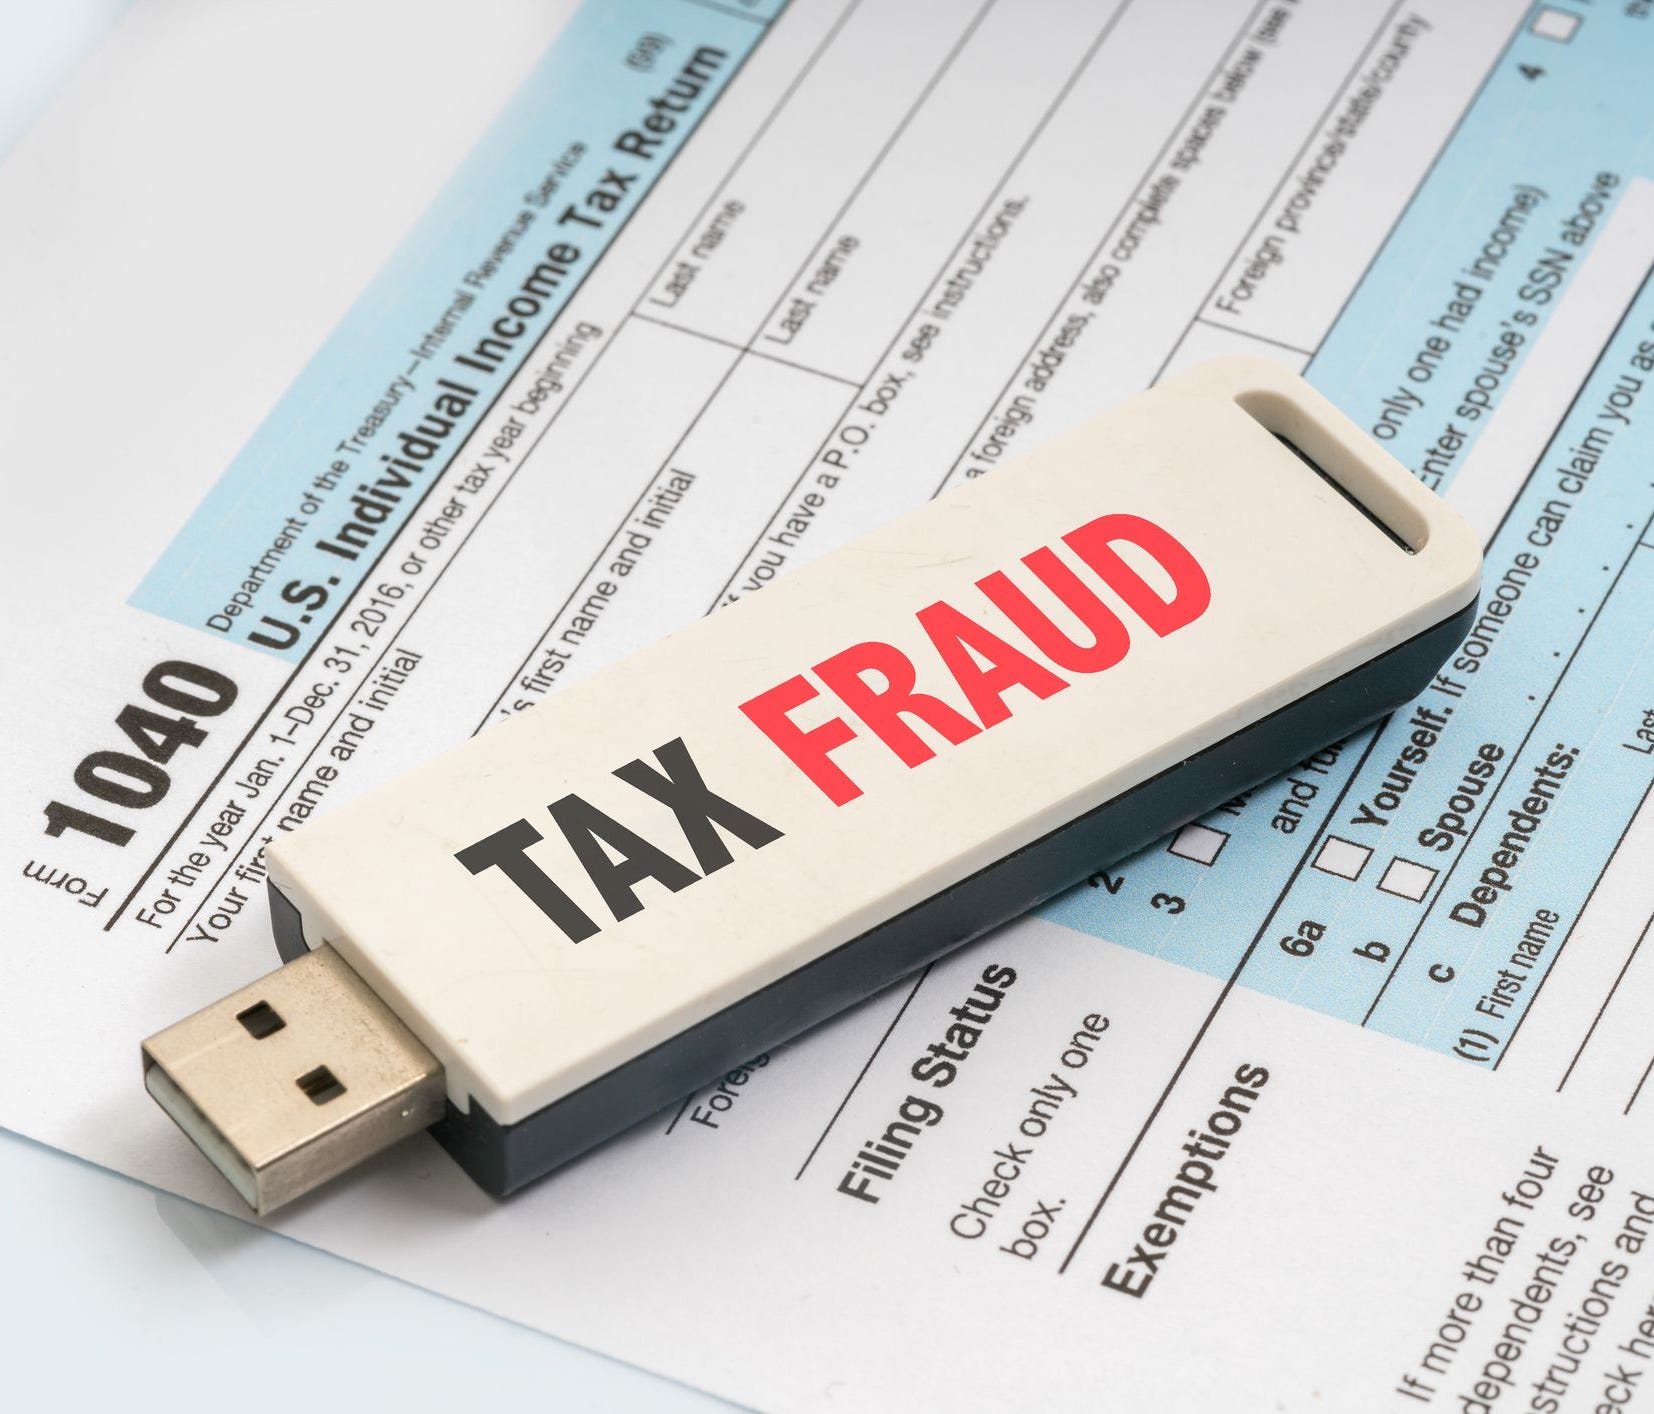 A survey conducted by the data security and identity protection firm found more than half of Americans aren't worried about tax fraud, despite federal reports showing identity thieves filed 787,000 fraudulent returns in 2016, which adds up to more th